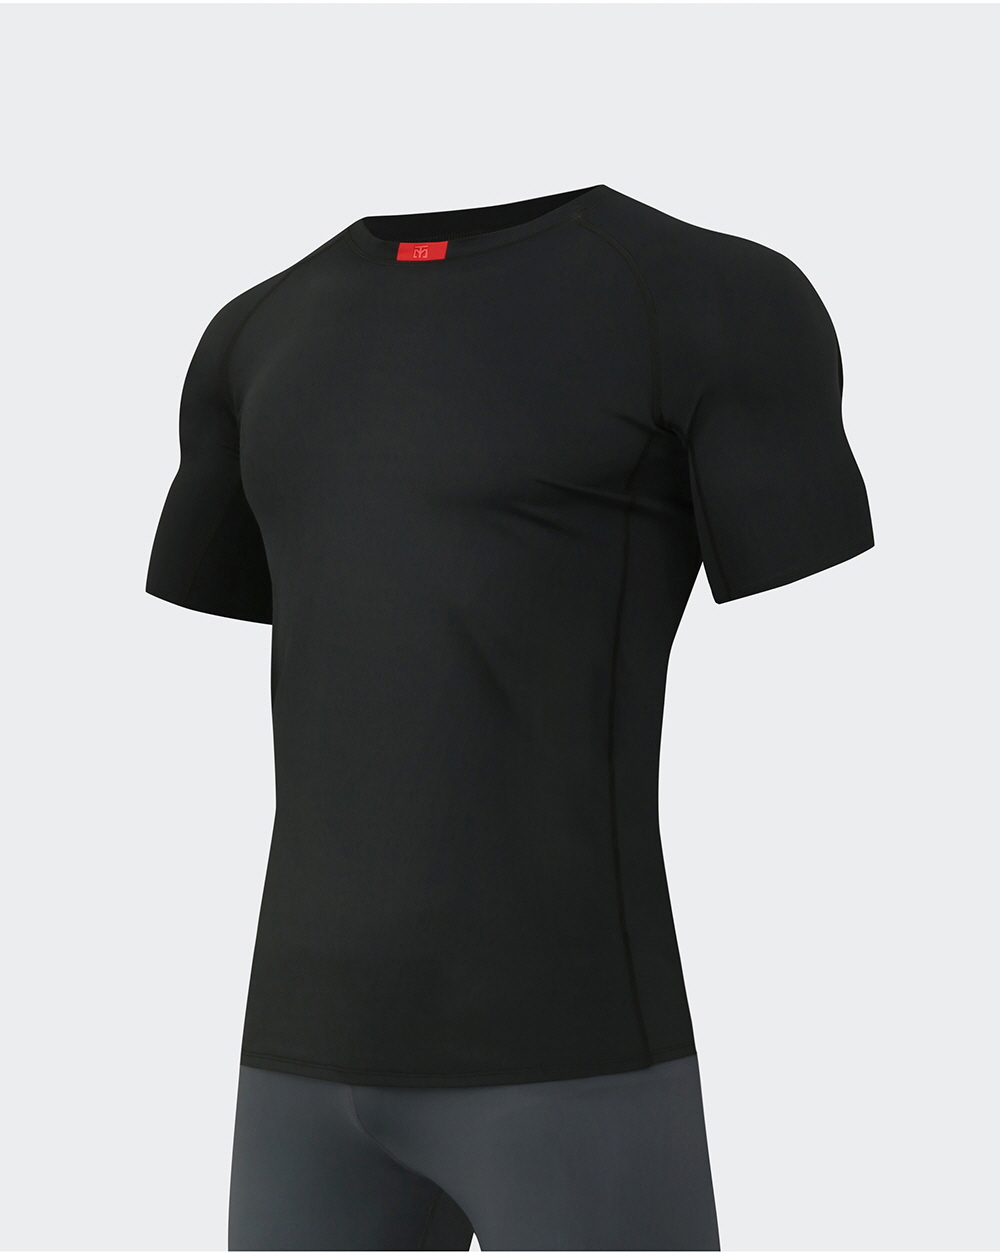 MOOTO Muscle Guard Round Tee (Black)